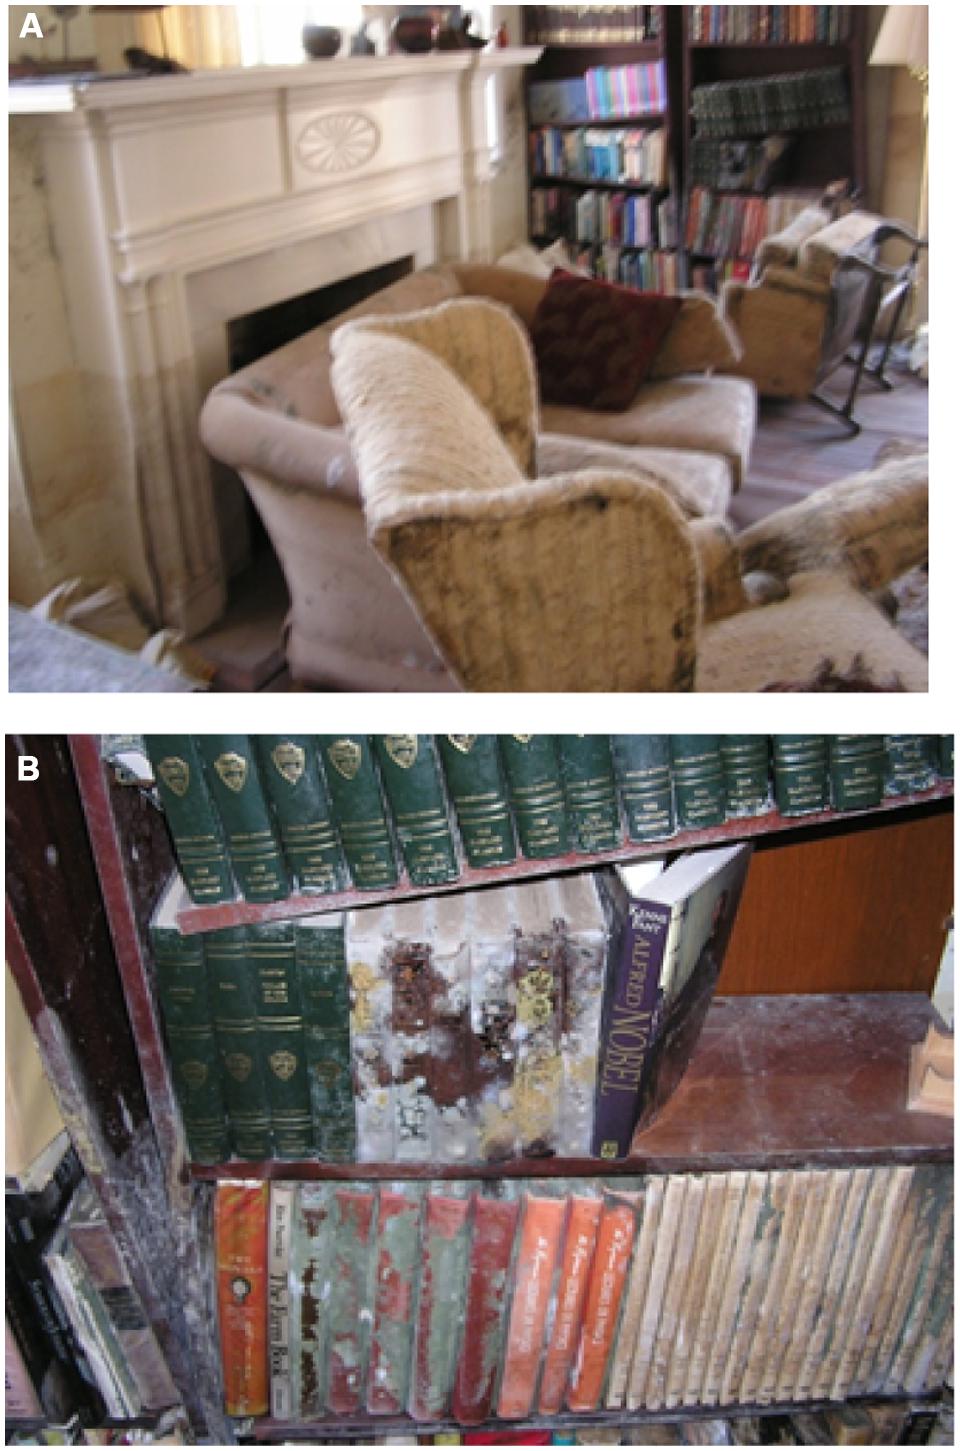 FIGURE 1. (A) The living room of the author’s New Orleans home on October 6, 2005 in the aftermath of Hurricane Katrina. (B) Closer view of moldy books on flooded book shelf.